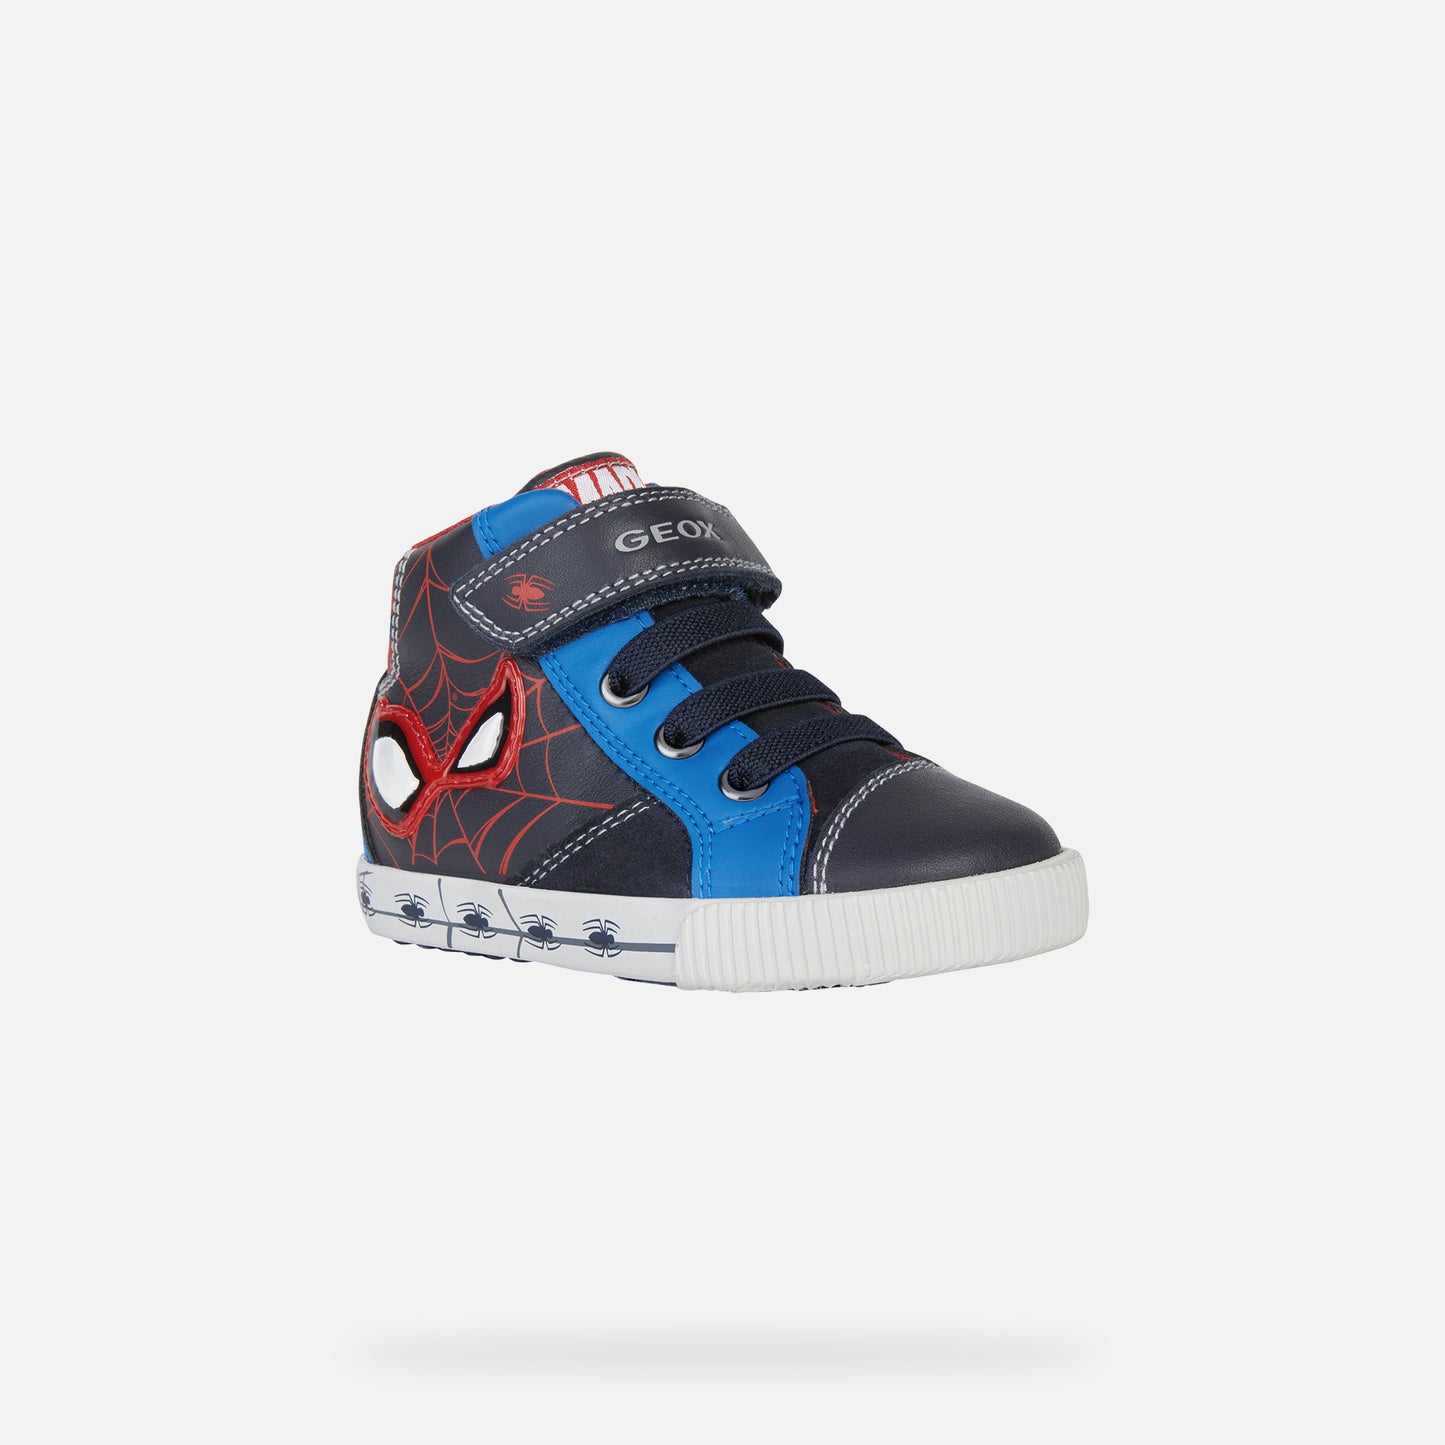 A boys Hi-Top trainer by Goex, style B Kilwi Boy Spiderman, in navy and royal with red Spiderman detail, velcro and inside zip fastening. Front angled view.